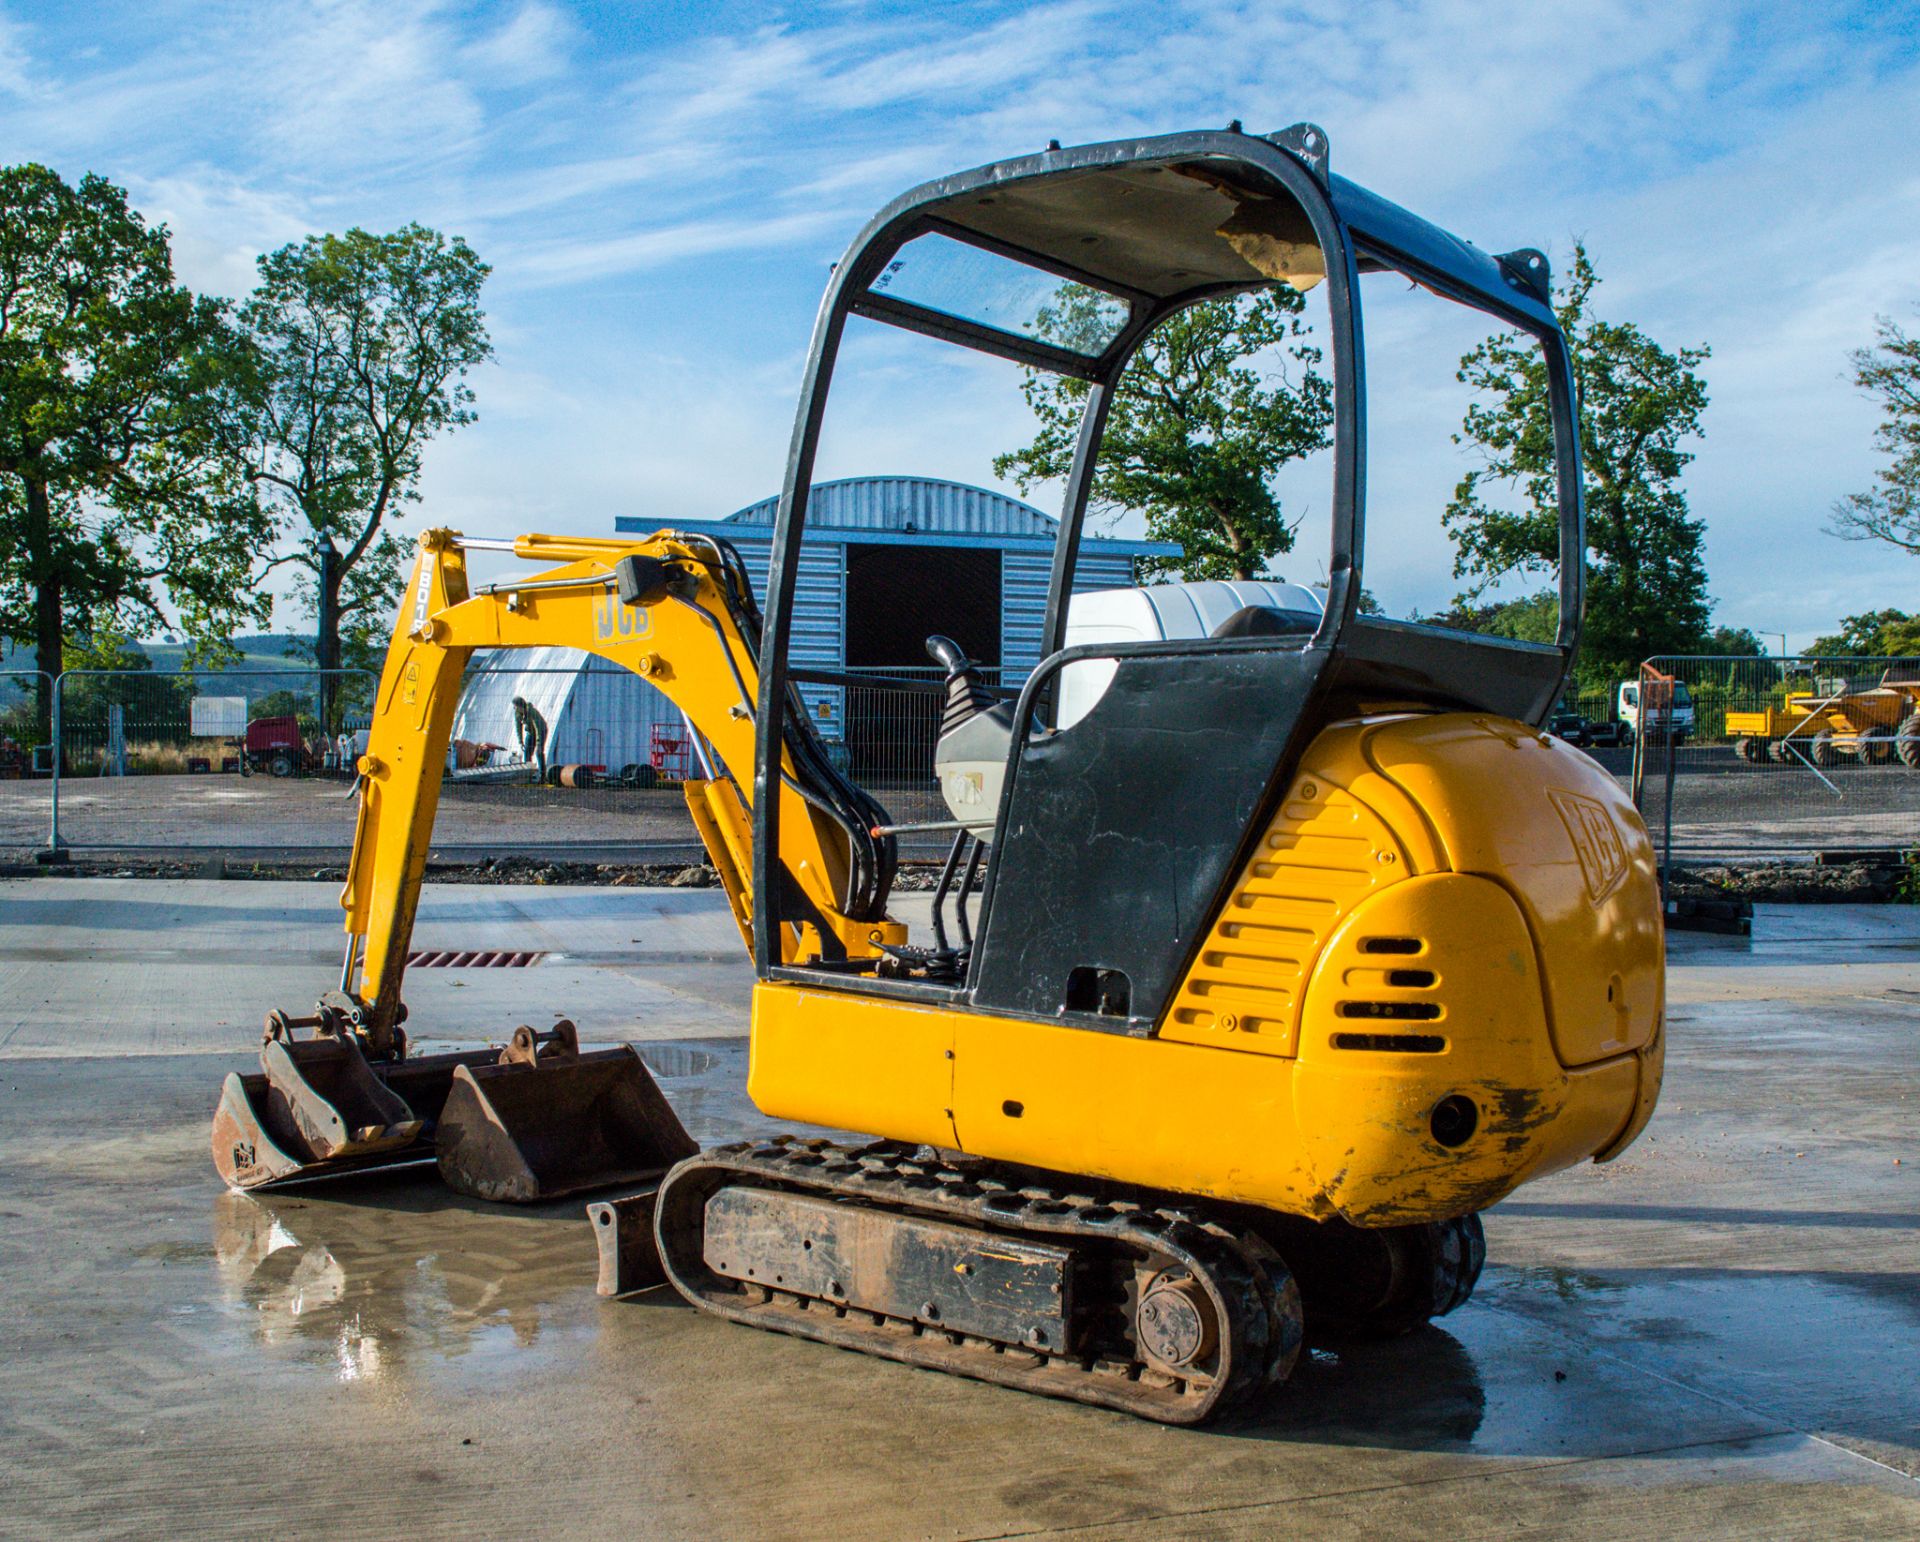 JCB 801.6 1.5 tonne rubber tracked mini excavator S/N: 7491 Recorded Hours: Not displayed (Clock - Image 4 of 17